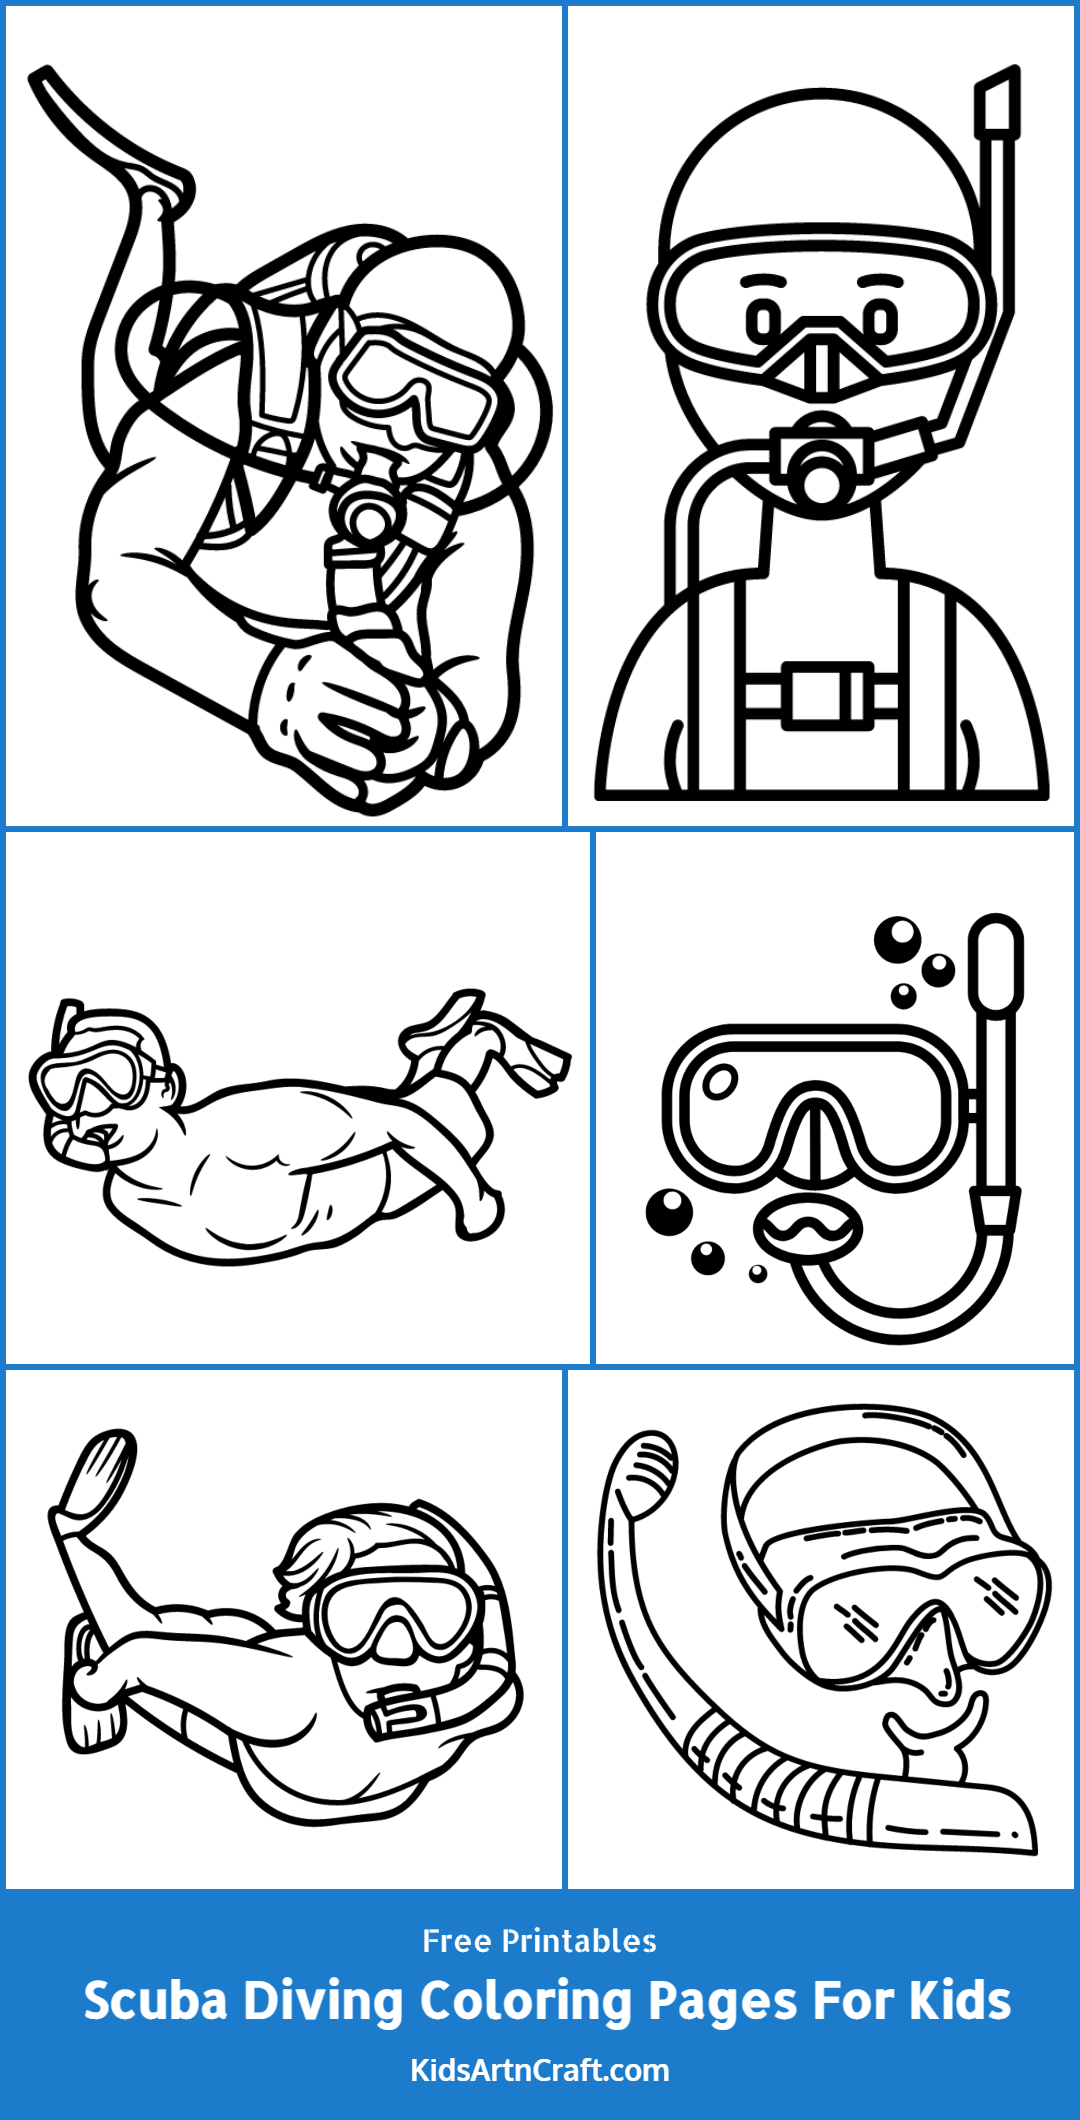 Scuba Diving Coloring Pages For Kids – Free Printables